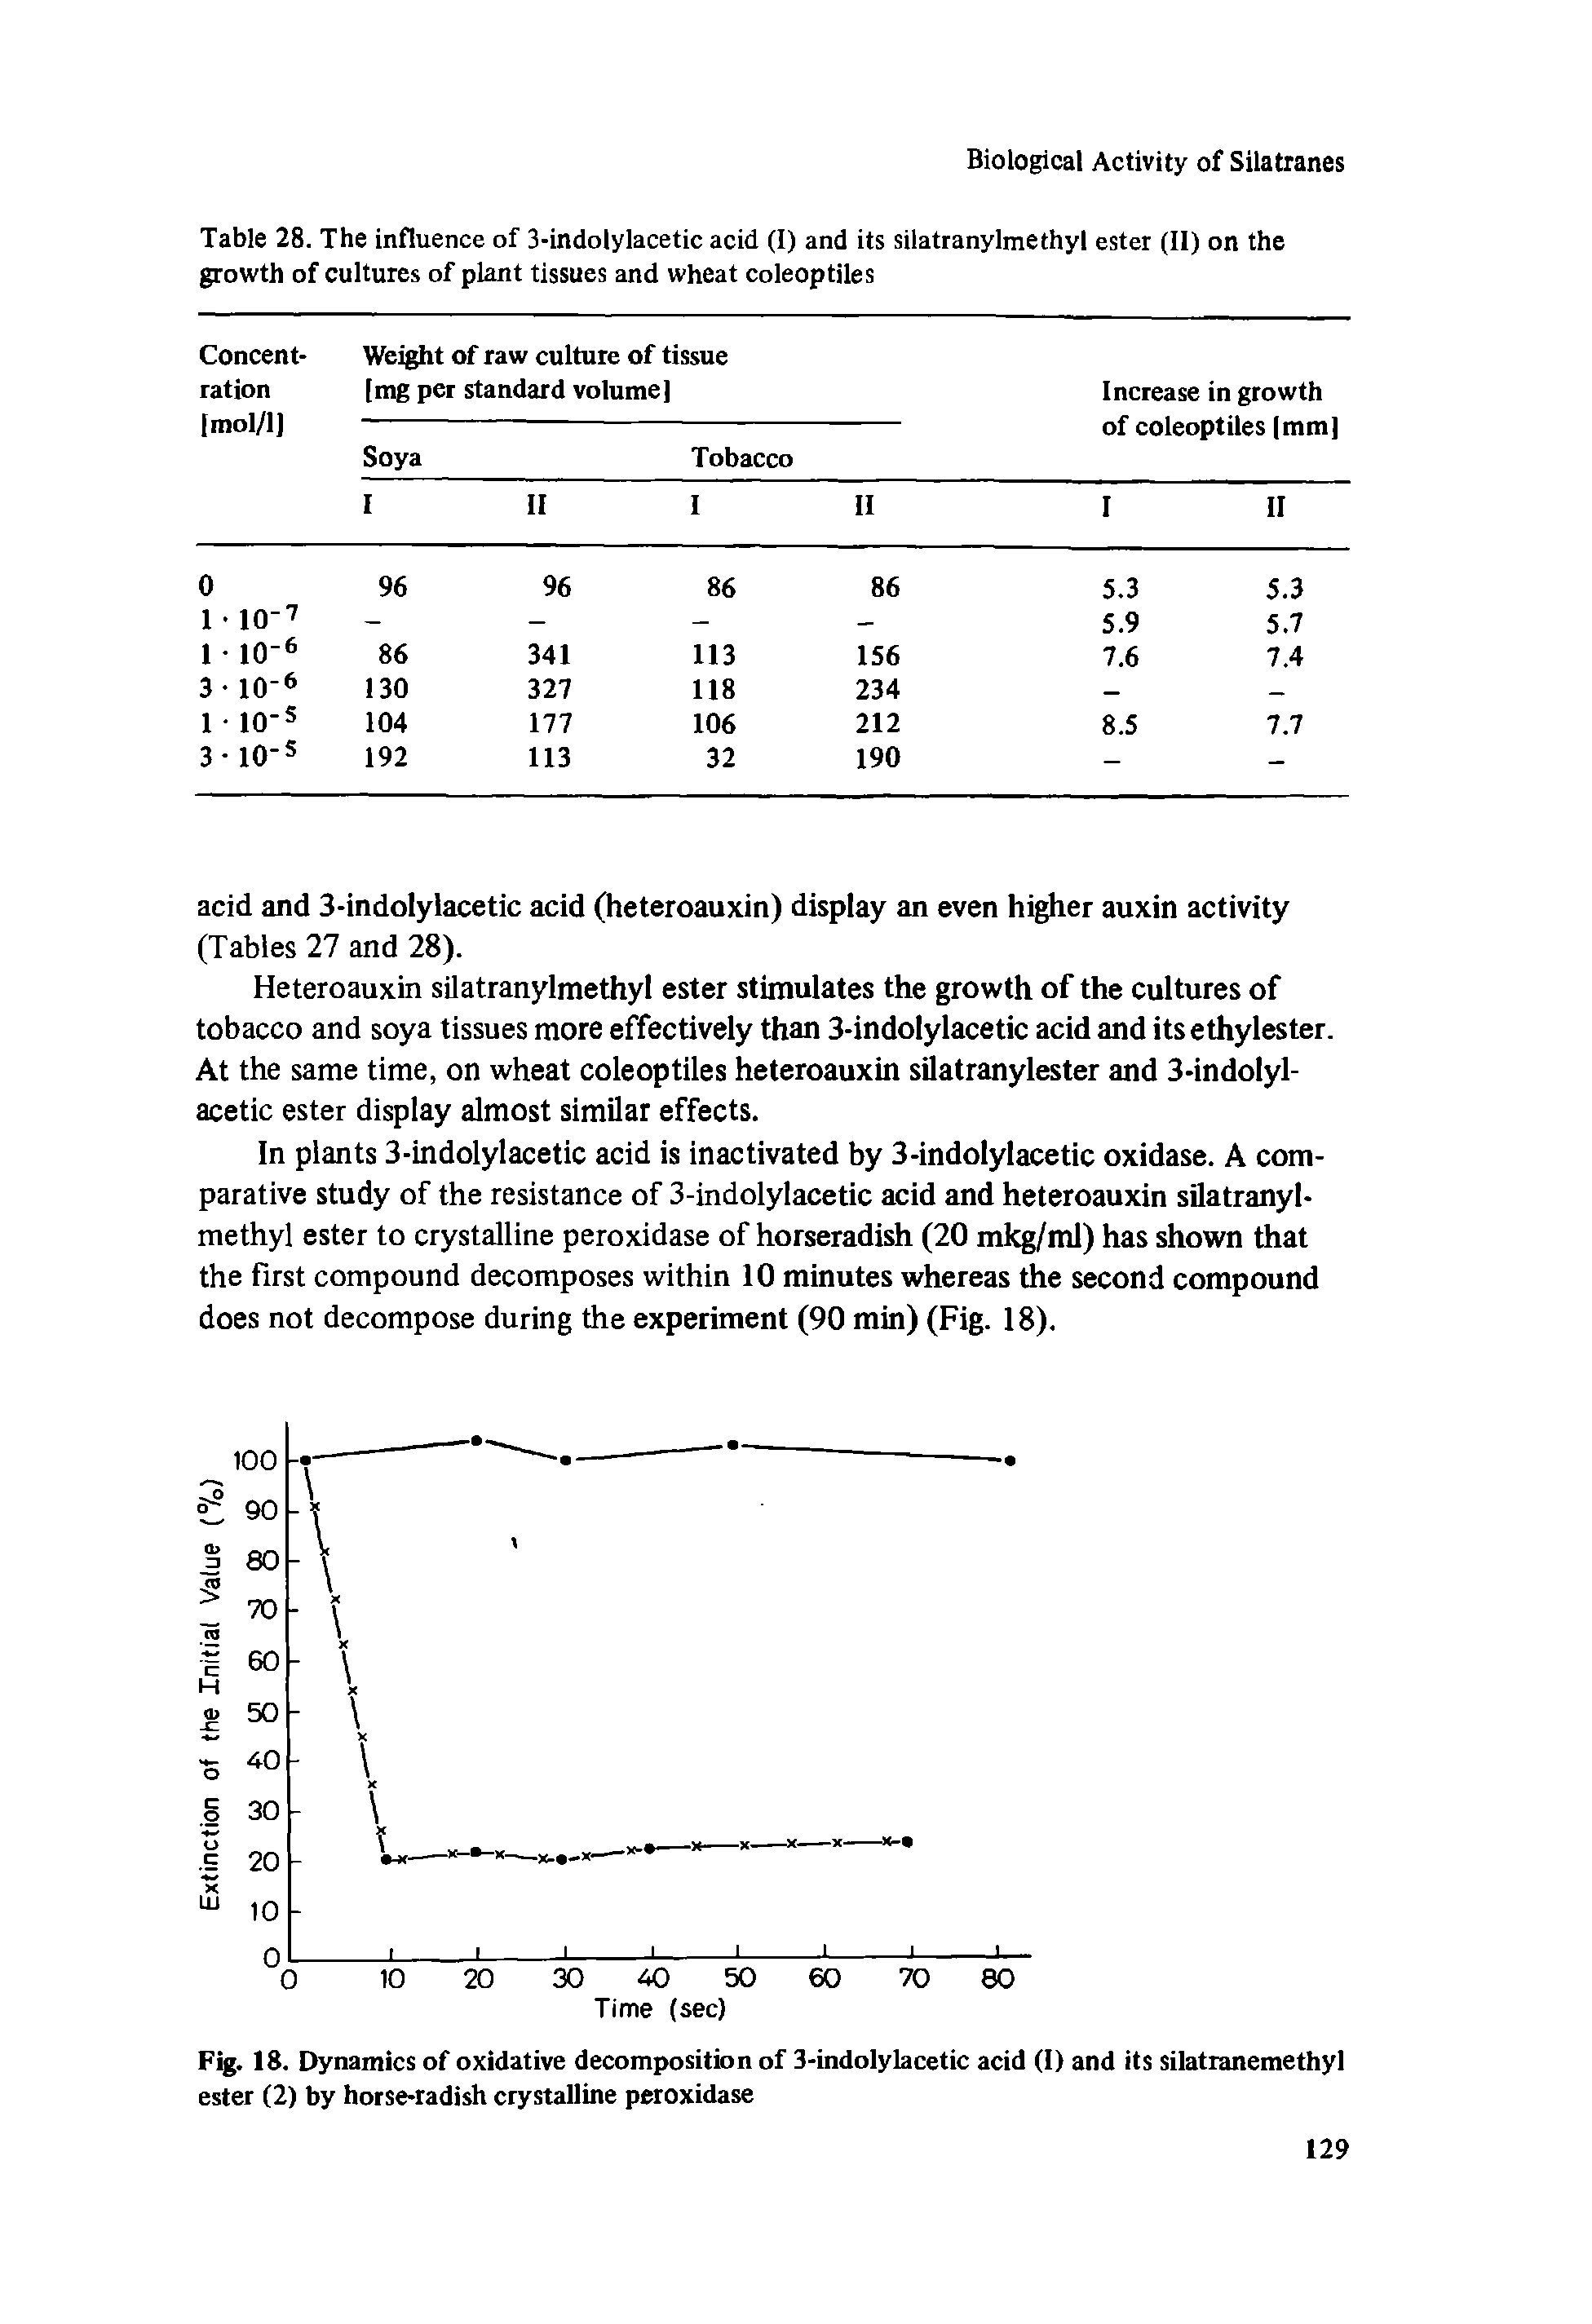 Table 28. The influence of 3-indolylacetic acid (I) and its silatranylmethyl ester (II) on the growth of cultures of plant tissues and wheat coleoptiles...